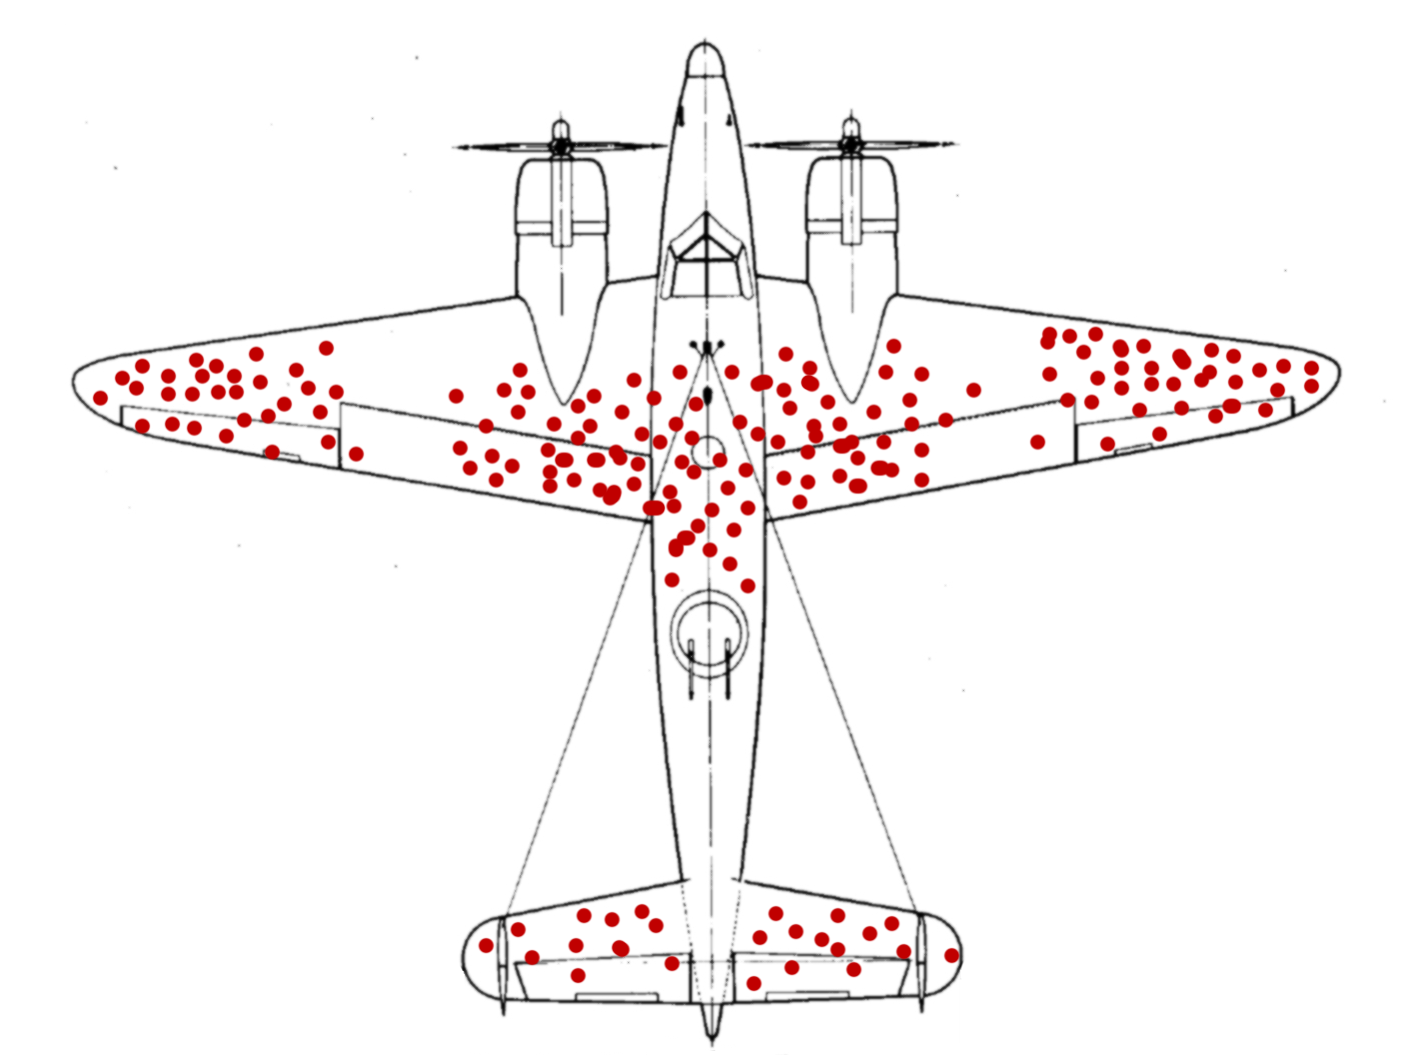 An illustration made in world war 2 to try and visualize the data of where air crafts were getting shot in battle.